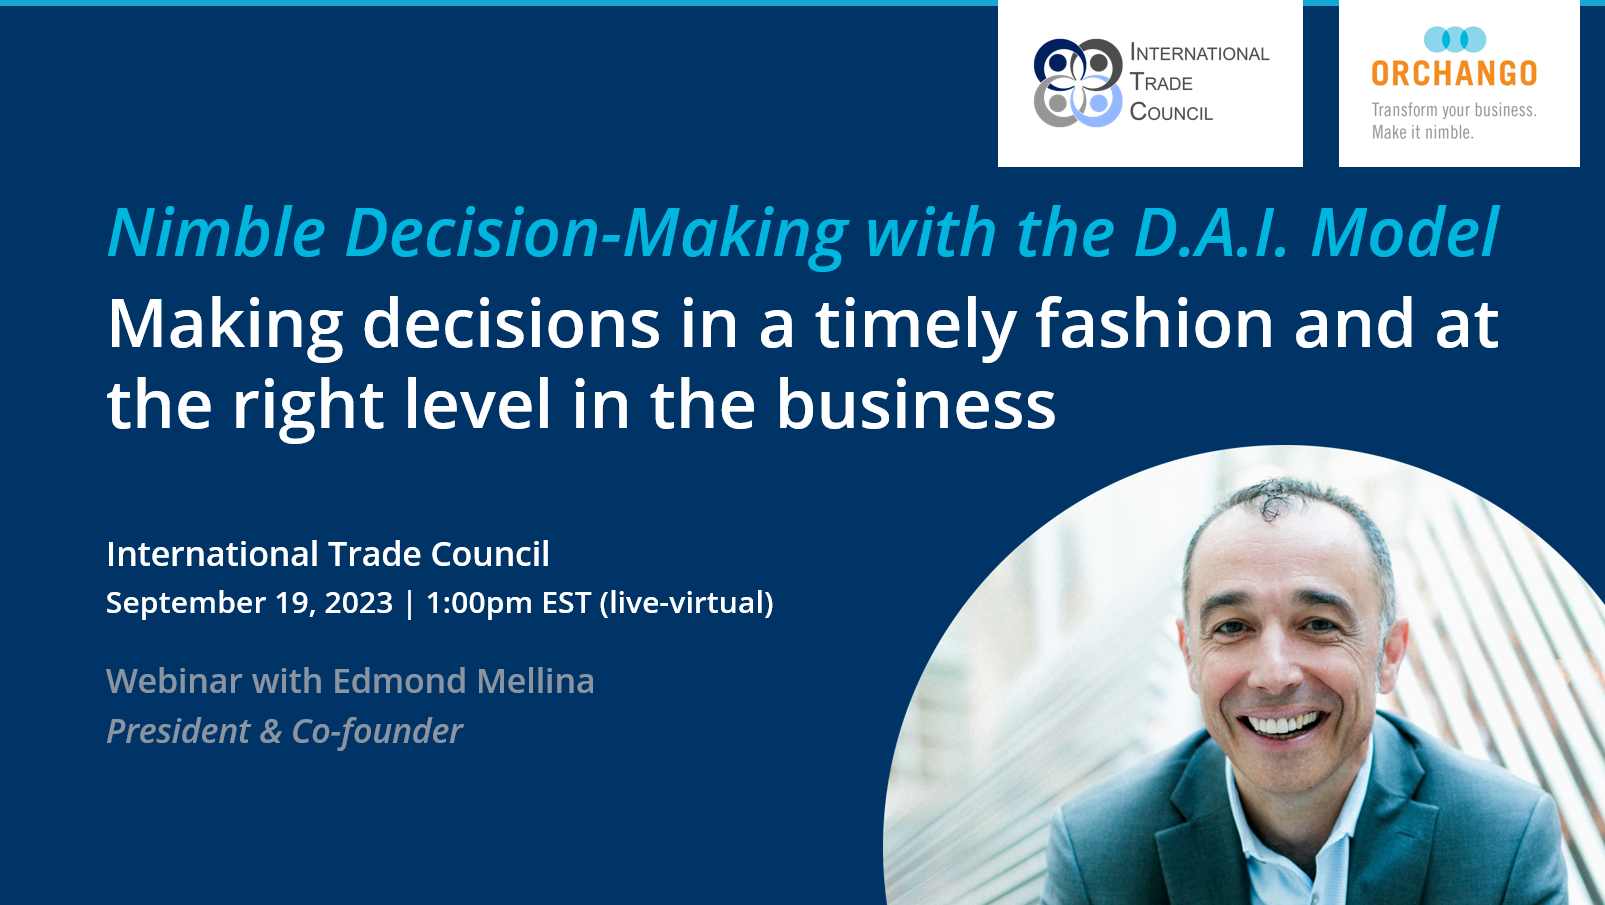 Webinar titled "Nimble Decision-Making with the D.A.I. Model" by ORCHANGO president & co-founder Edmond Mellina on Sep-19-2023 for International Trade Council